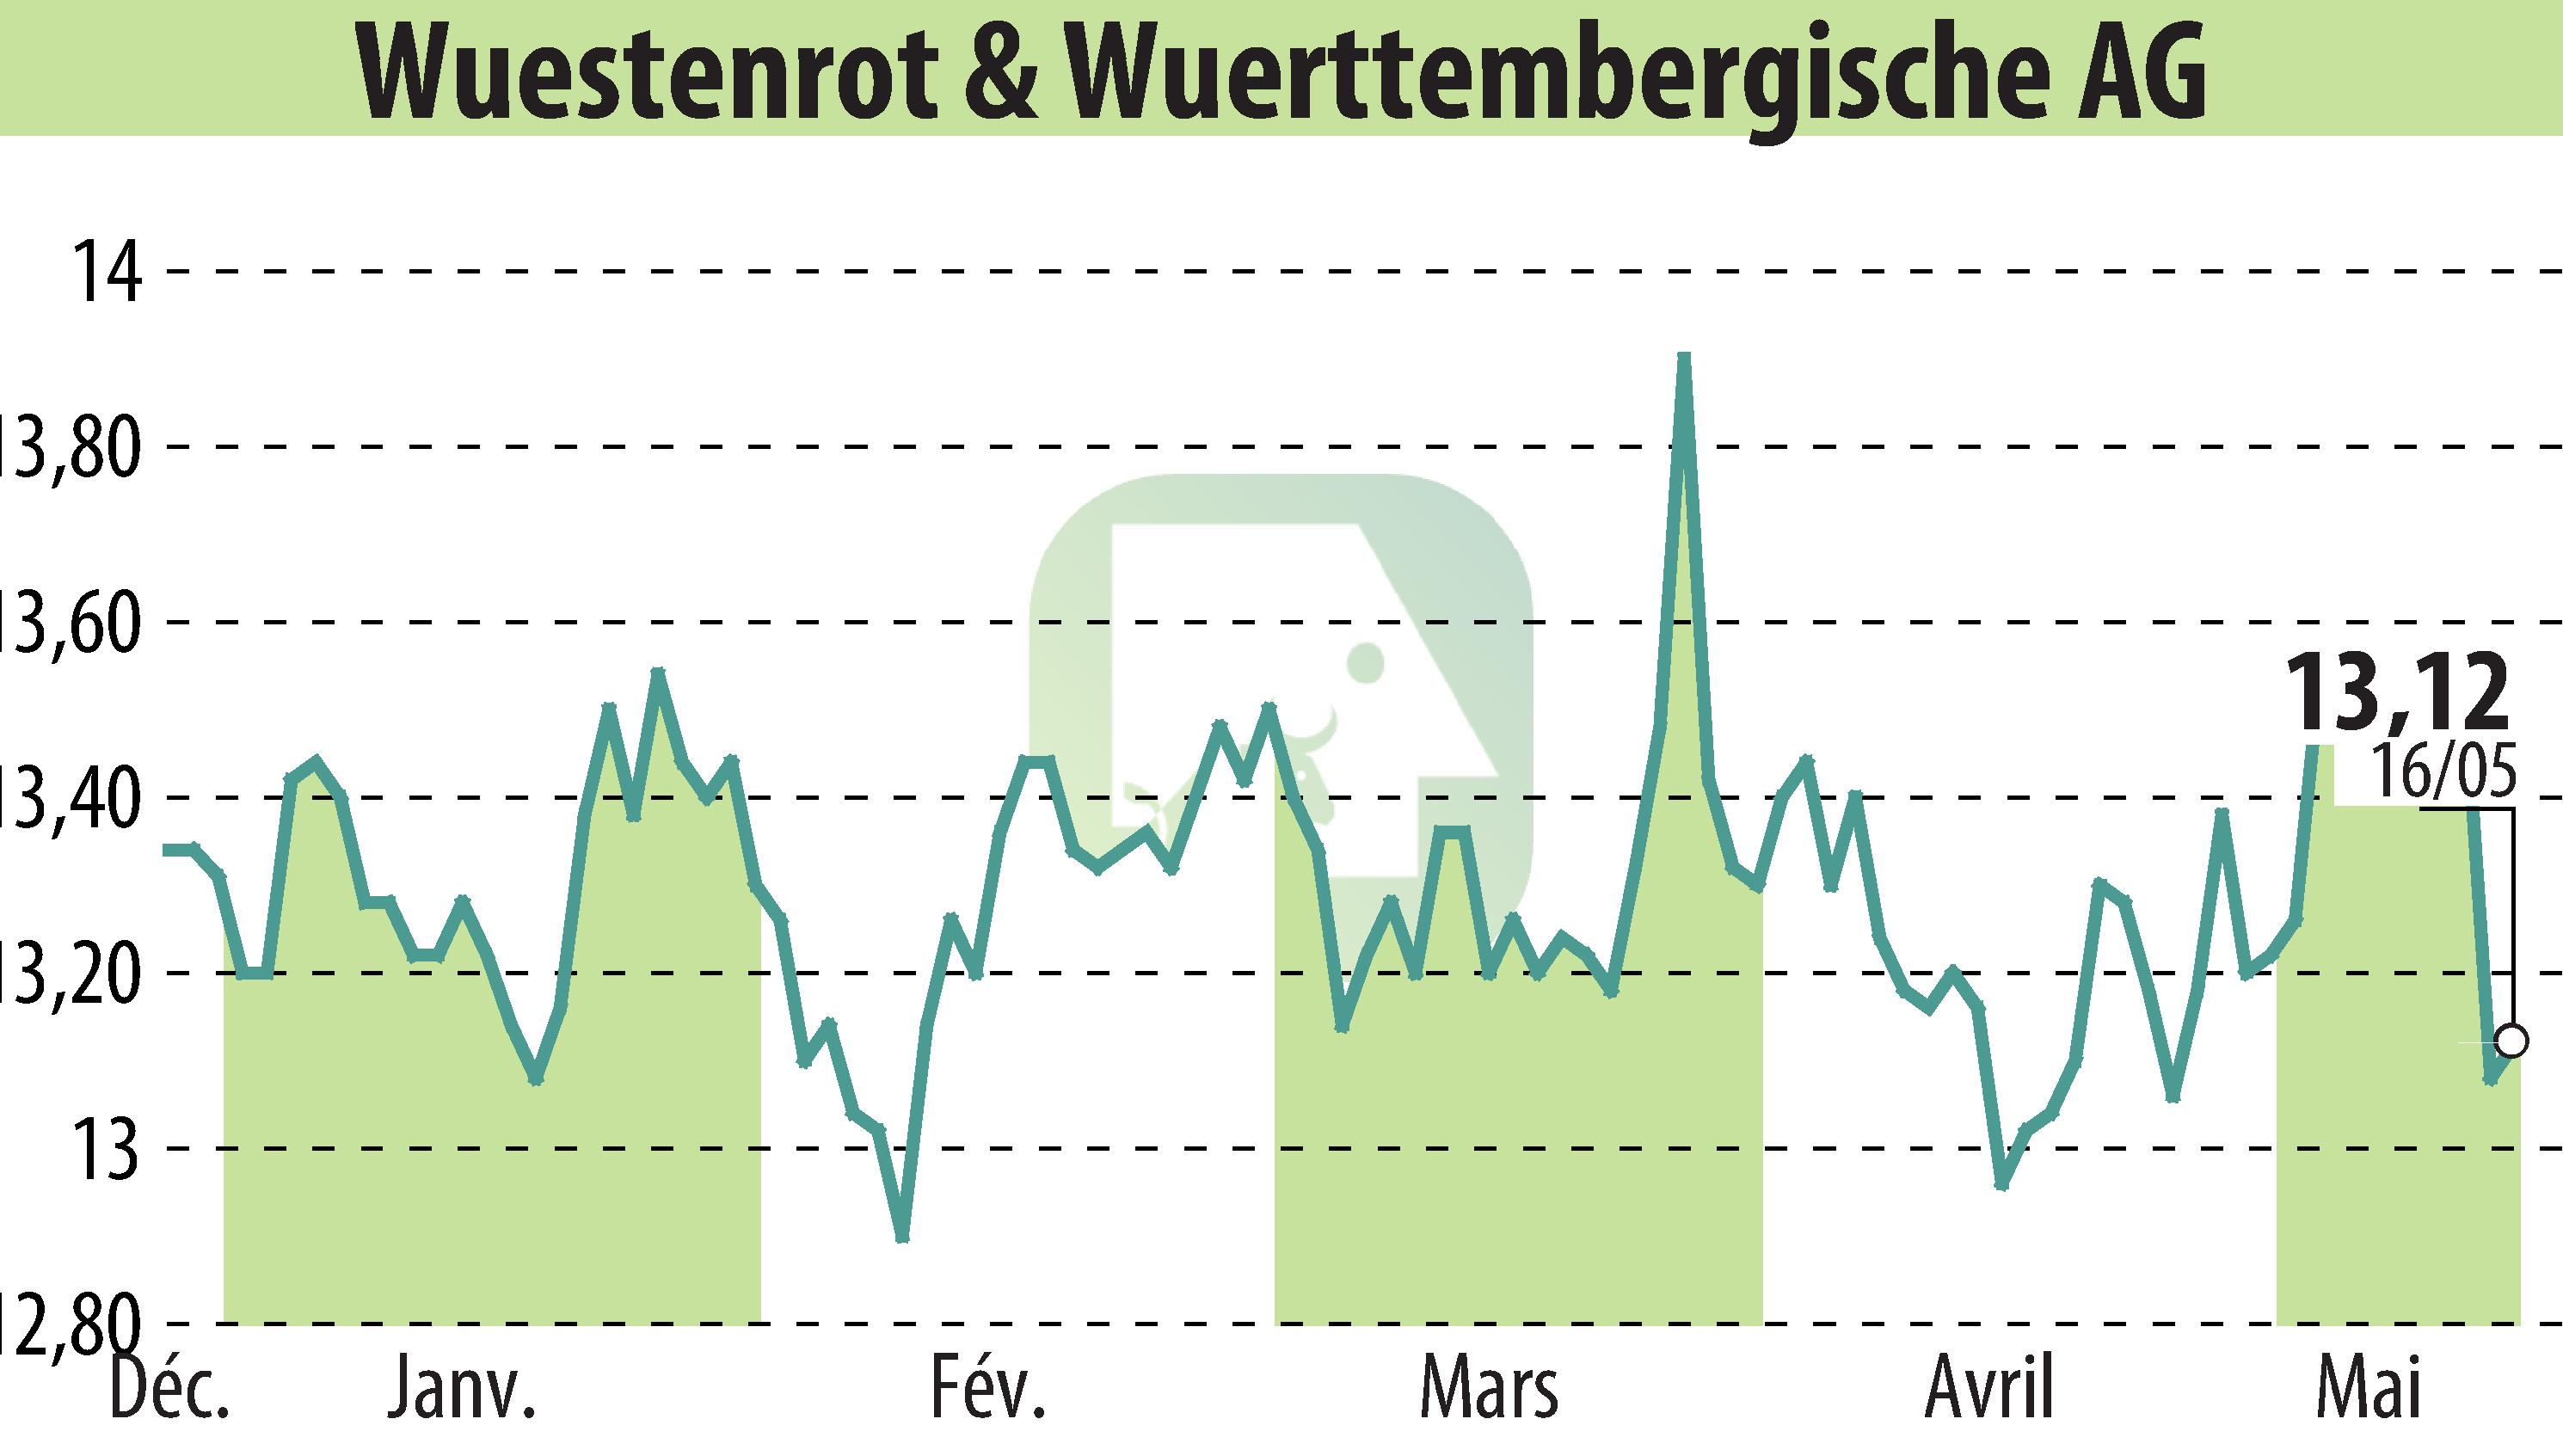 Stock price chart of Wüstenrot & Württembergische AG (EBR:WUW) showing fluctuations.